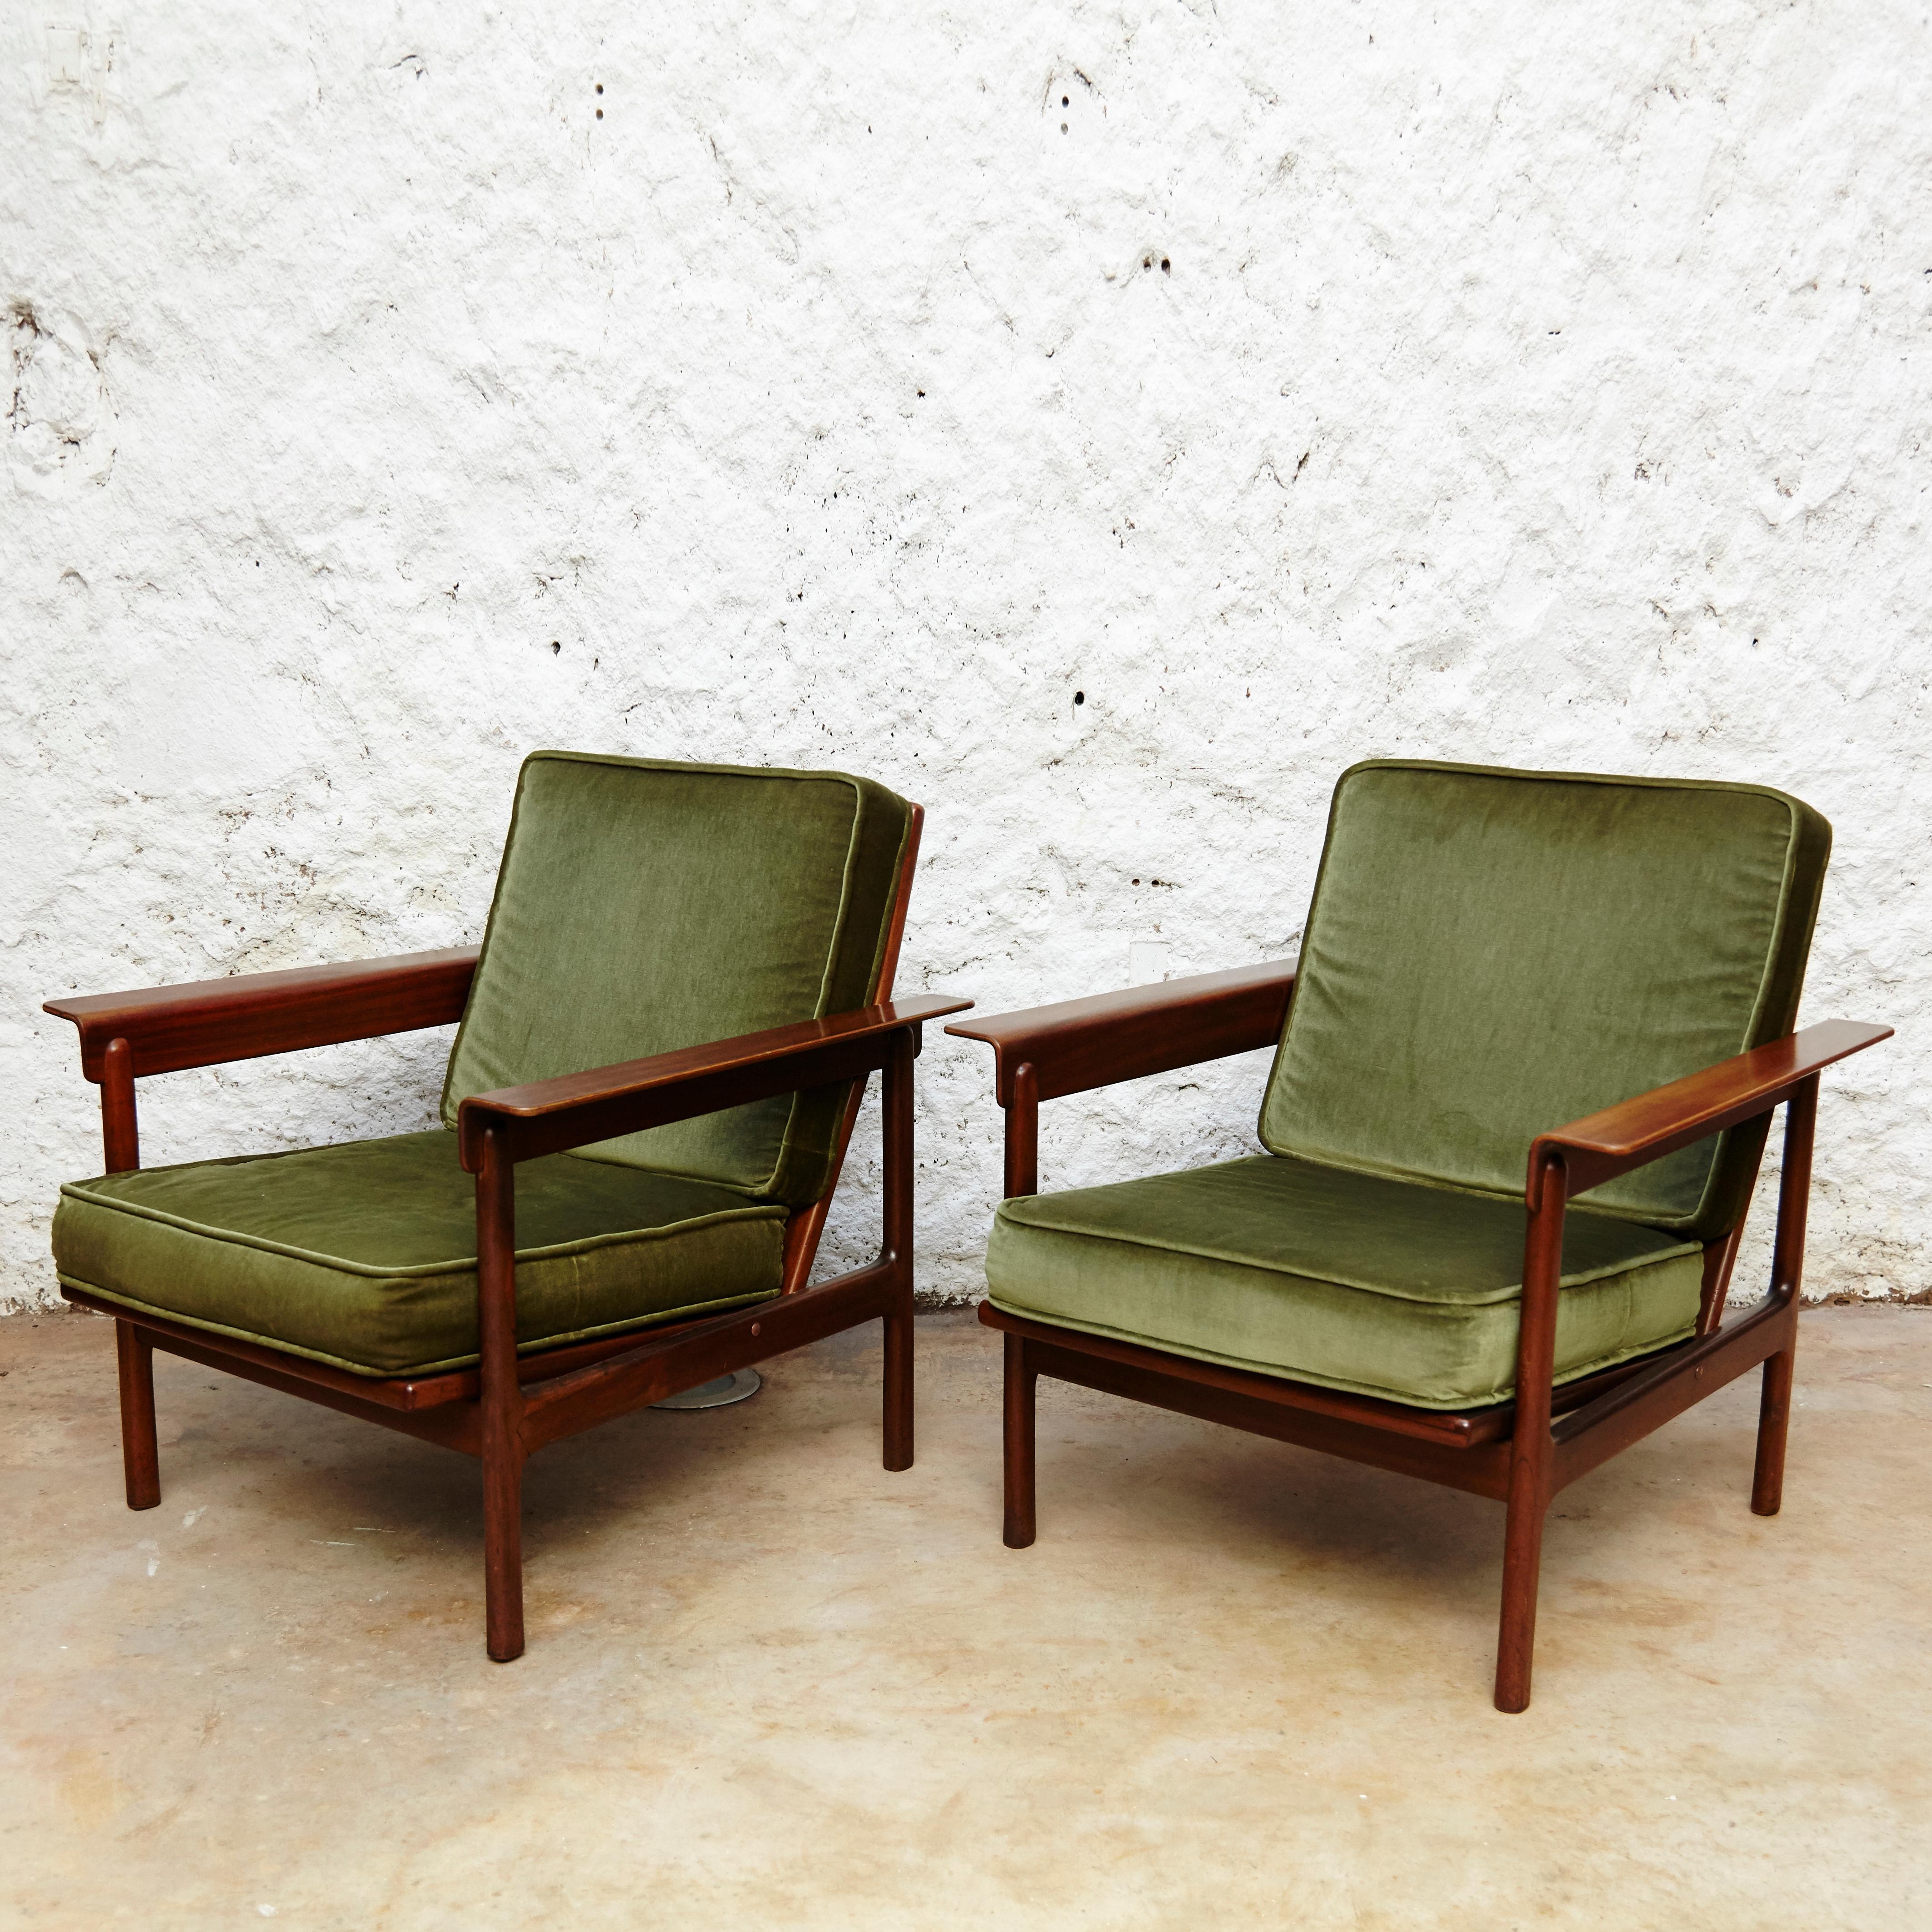 Set of two easy chairs.
Manufactured by AG Barcelona circa 1960.
Made in teak wood with original green upholstery.
Scandinavian style.
Stamped by Manufacturers Label.

In original condition with minor wear consistent of age and use, preserving a